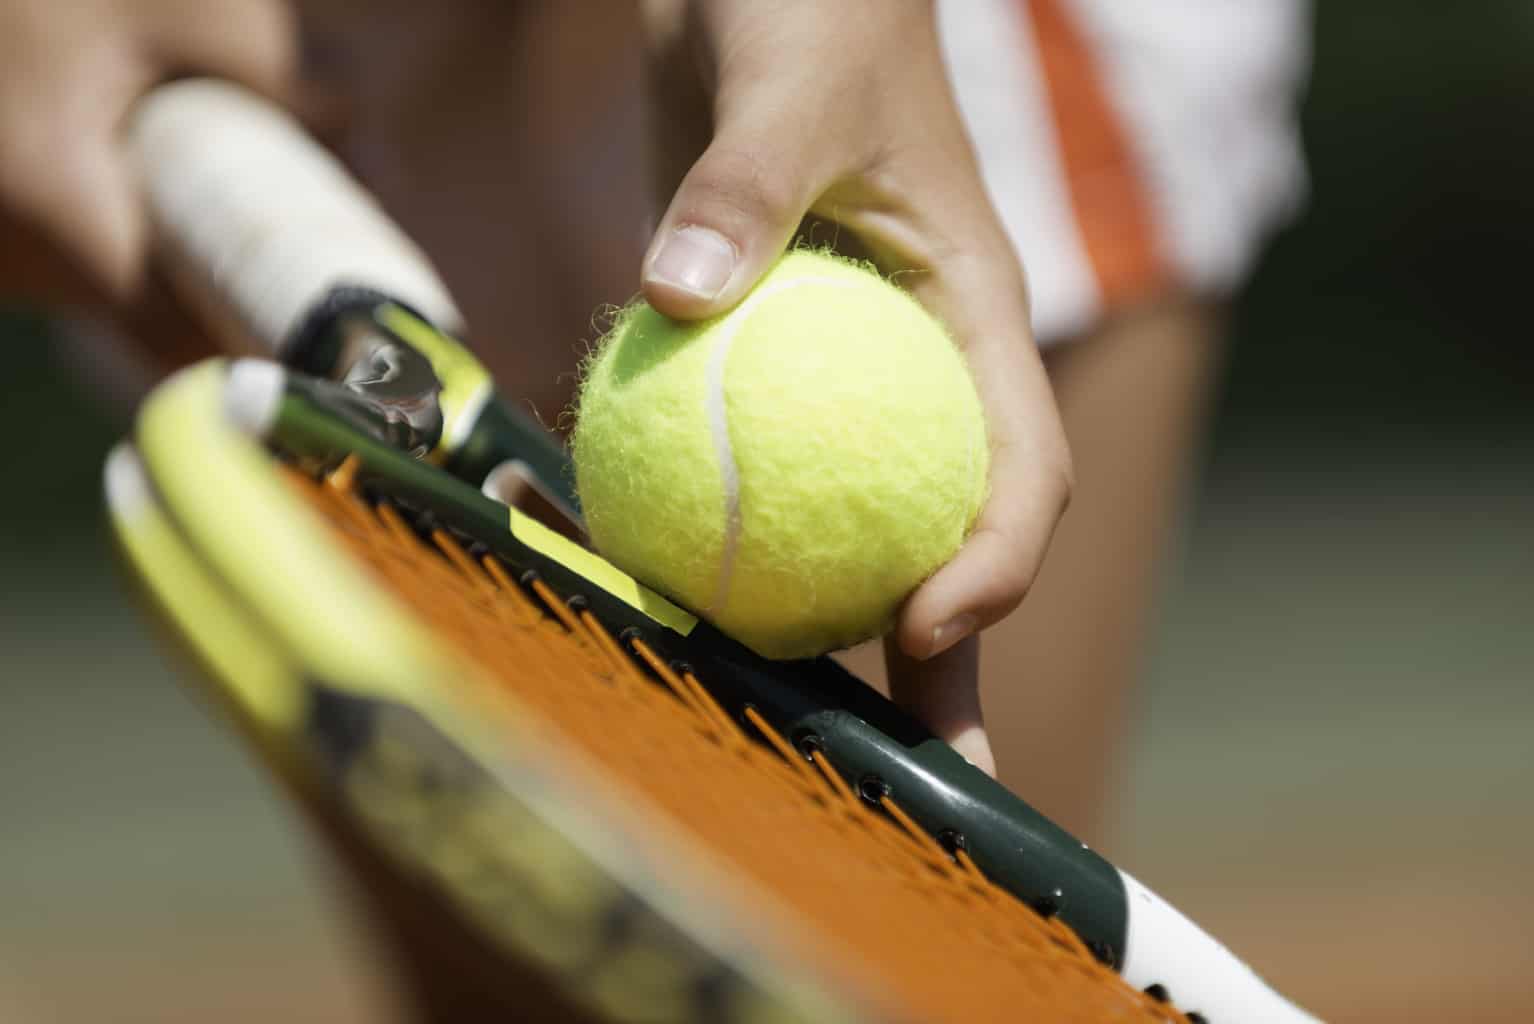 Tennis Elbow: Mechanisms of Injury and Treatment Modalities - Franklin Square Health Group